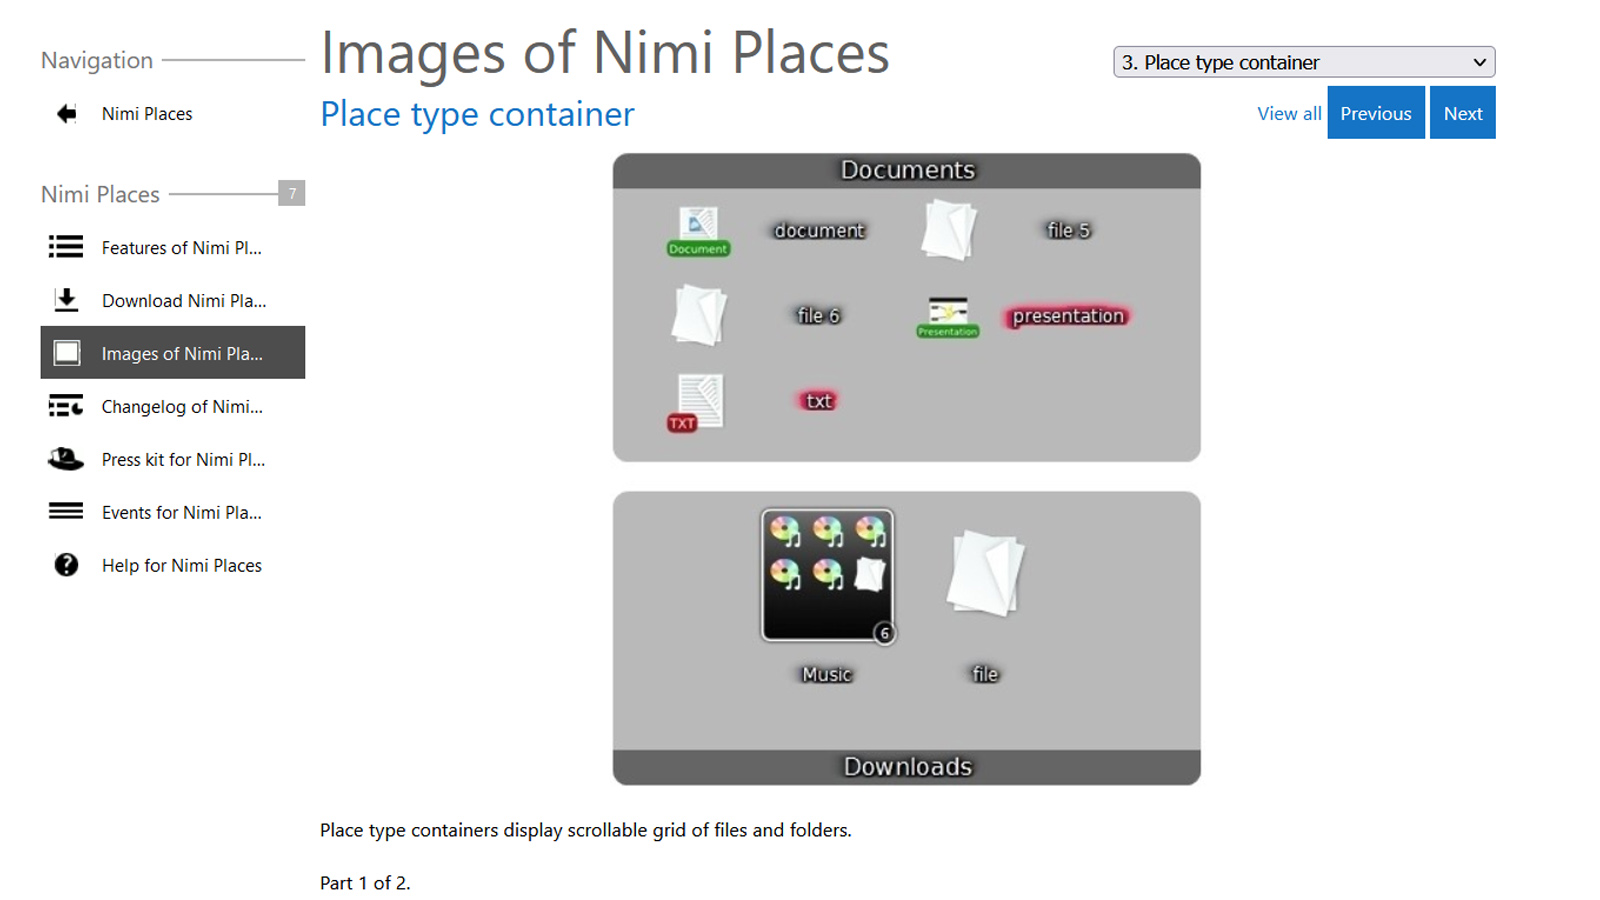 Get feedback from a vast remote working audience about Nimi Places